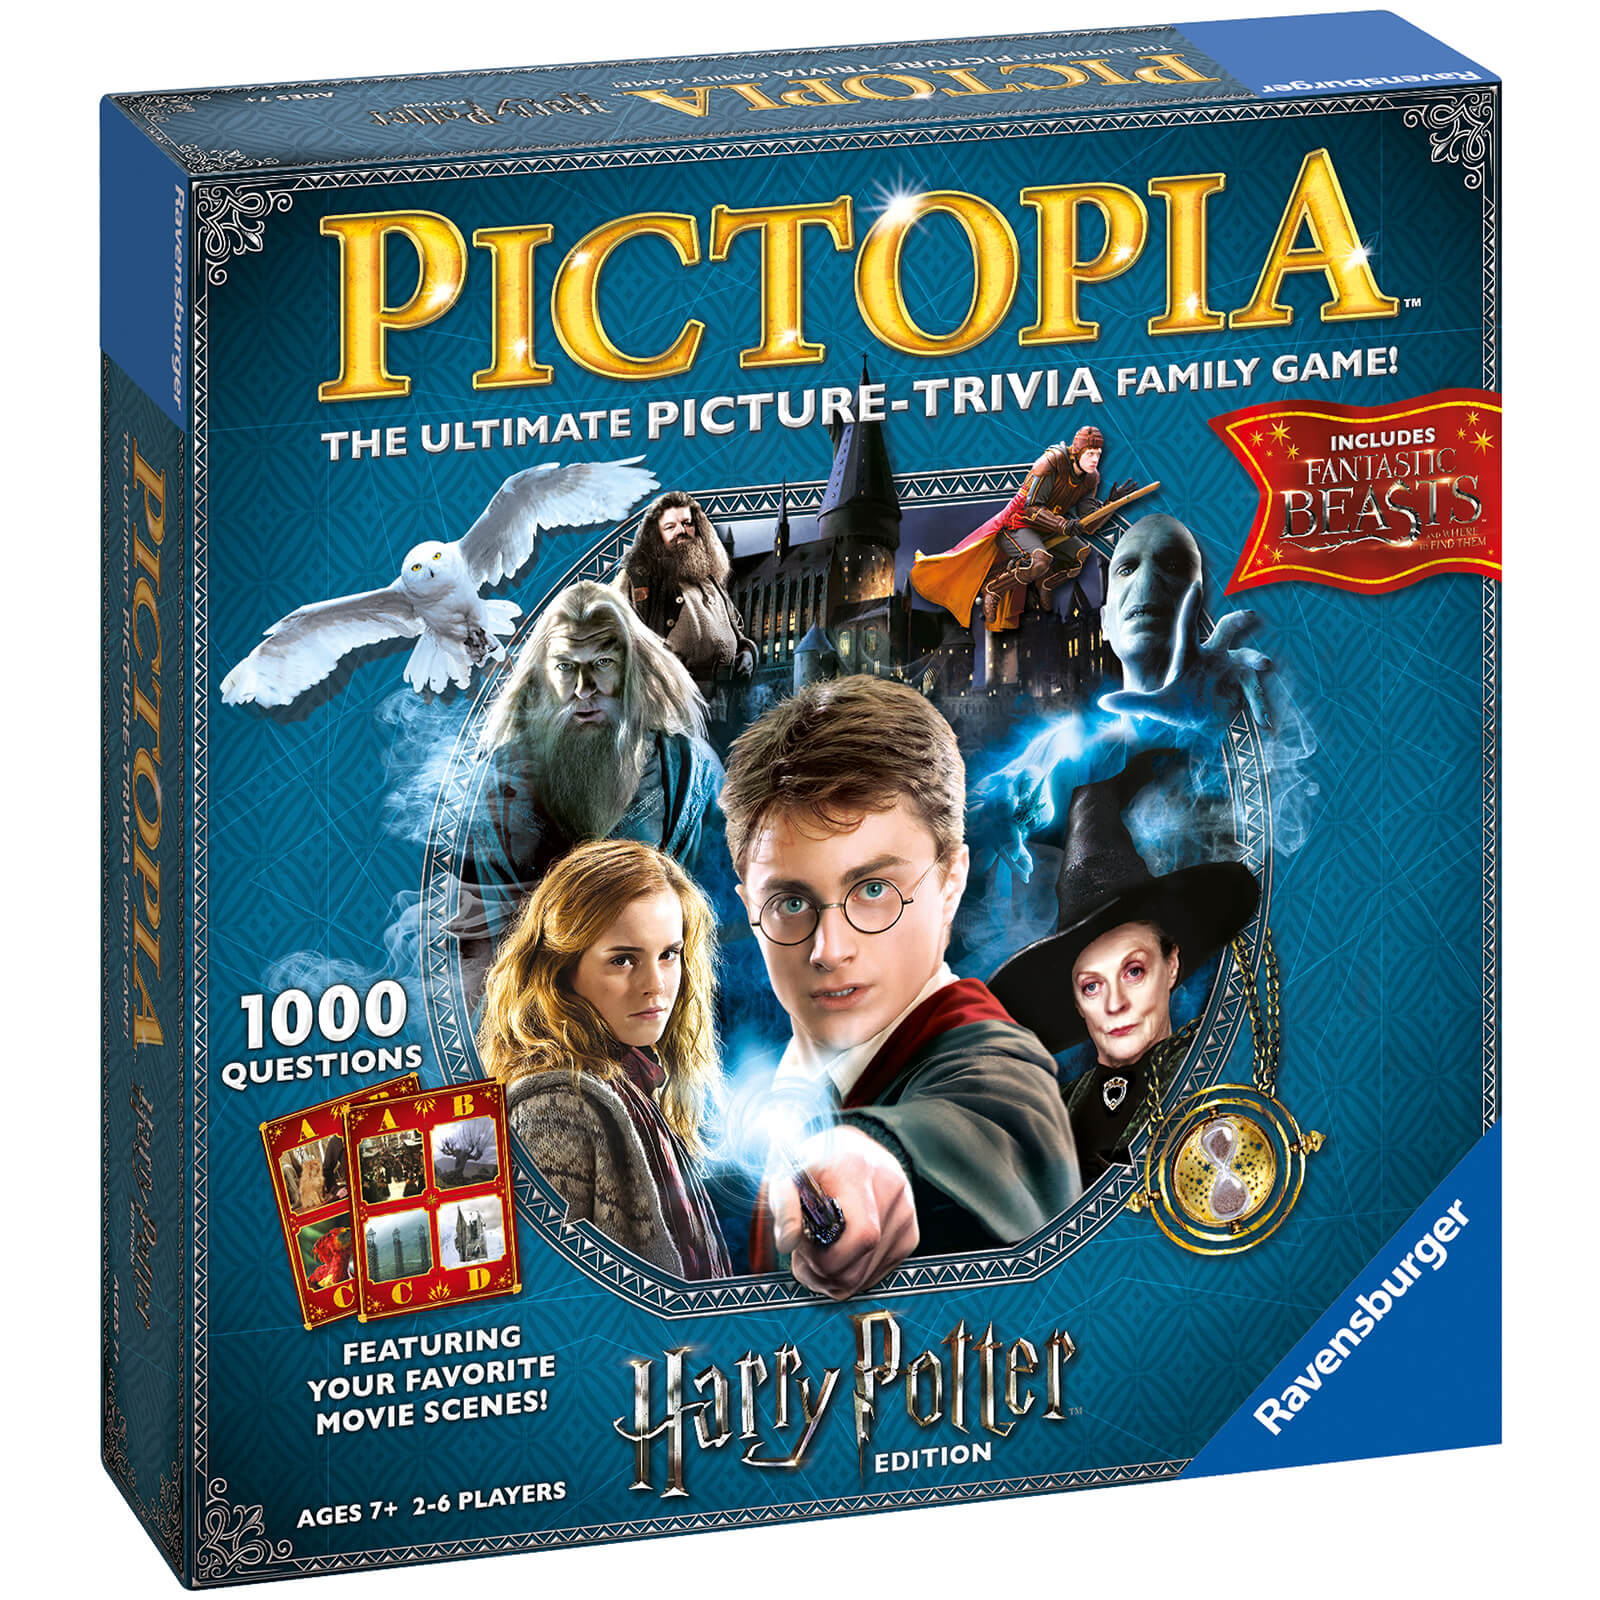 Ravensbuger Pictopia Board Game - Harry Potter Edition